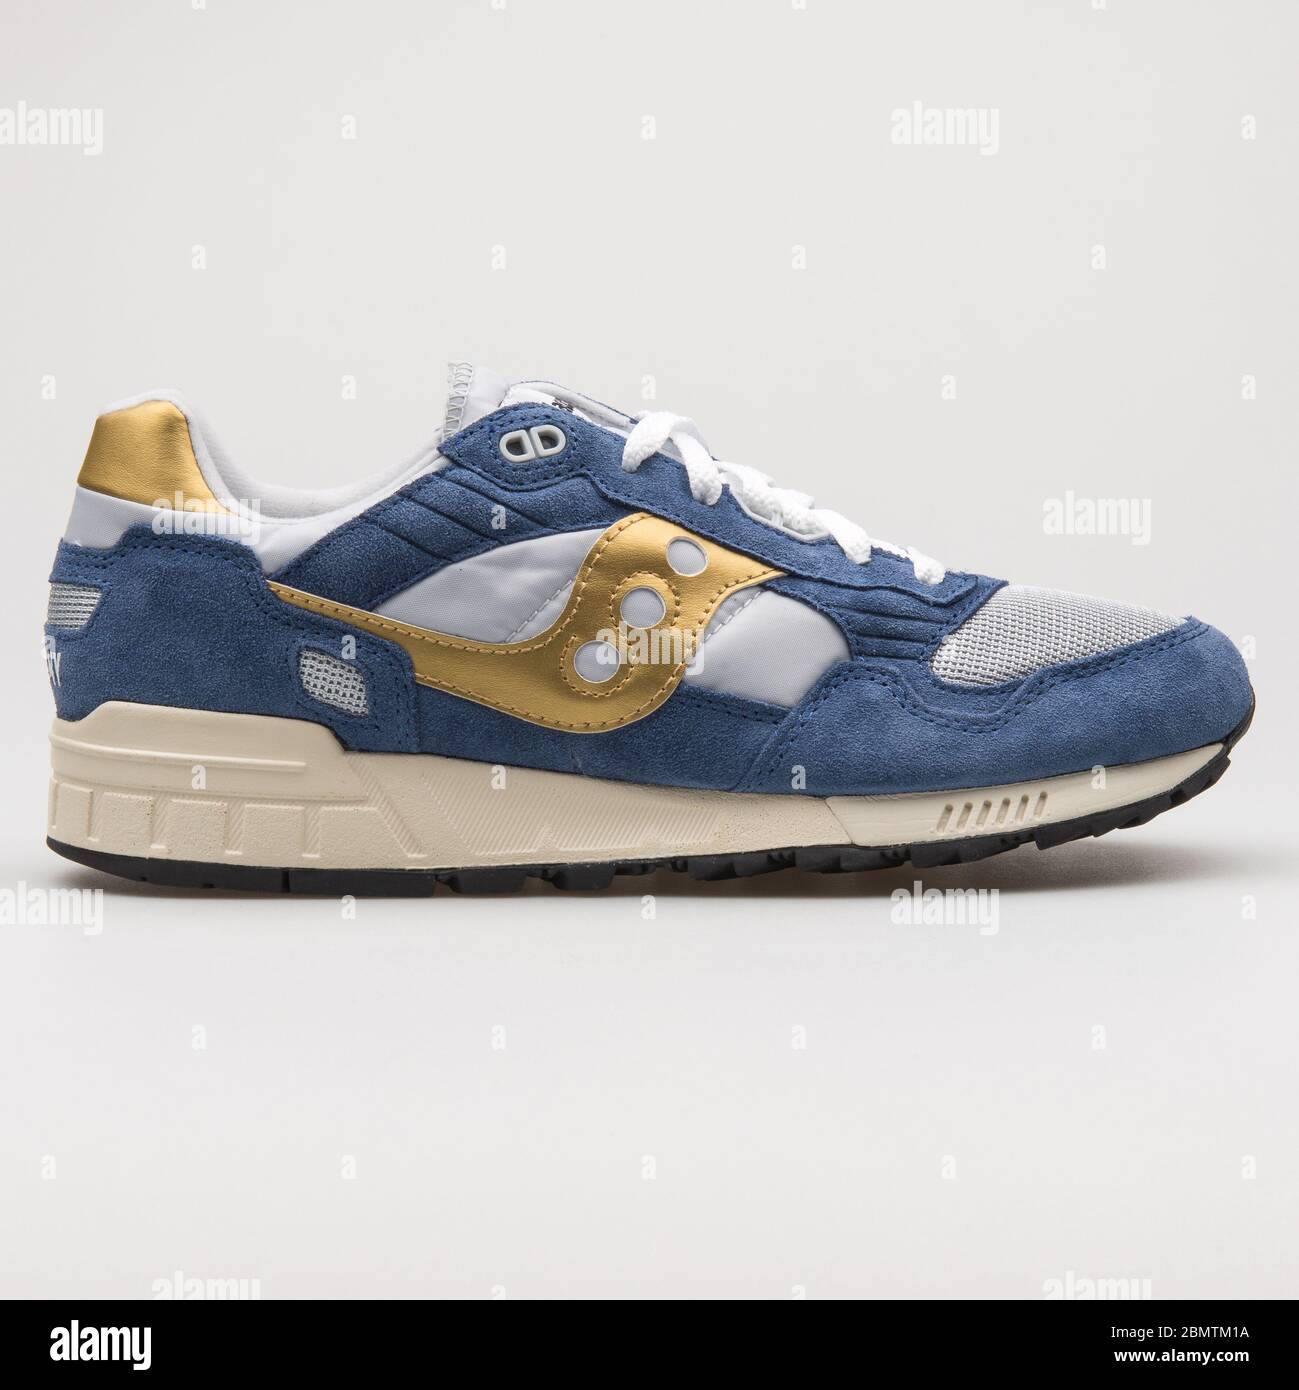 saucony shadow 5000 white gold